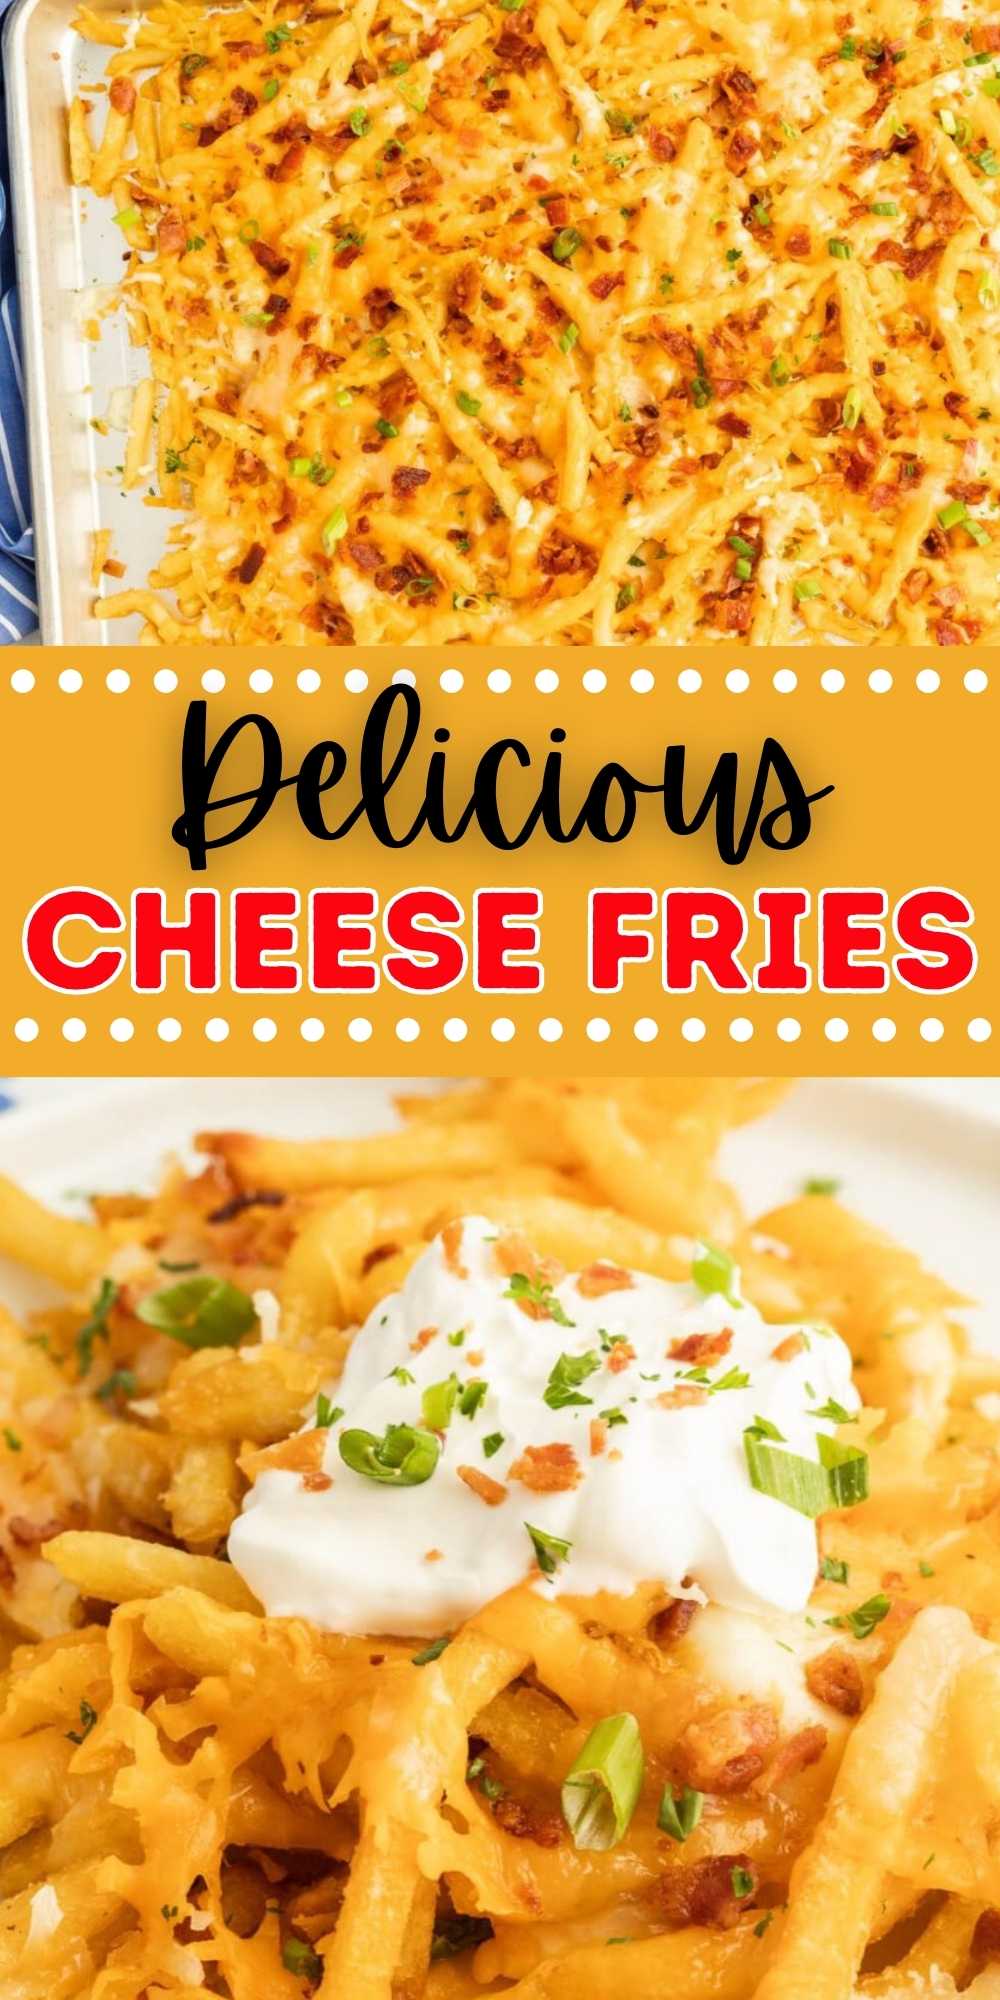 These Cheese Fries are a favorite snack. We love to top French Fries with cheese, chopped bacon and more to create a sheet pan appetizer. This cheese fries recipe is quick and easy. Feel free to make chili cheese fries or add shredded chicken. You can turn this comfort food appetizer into a hearty meal idea. #eatingonadime #cheesefries #easyappetizer